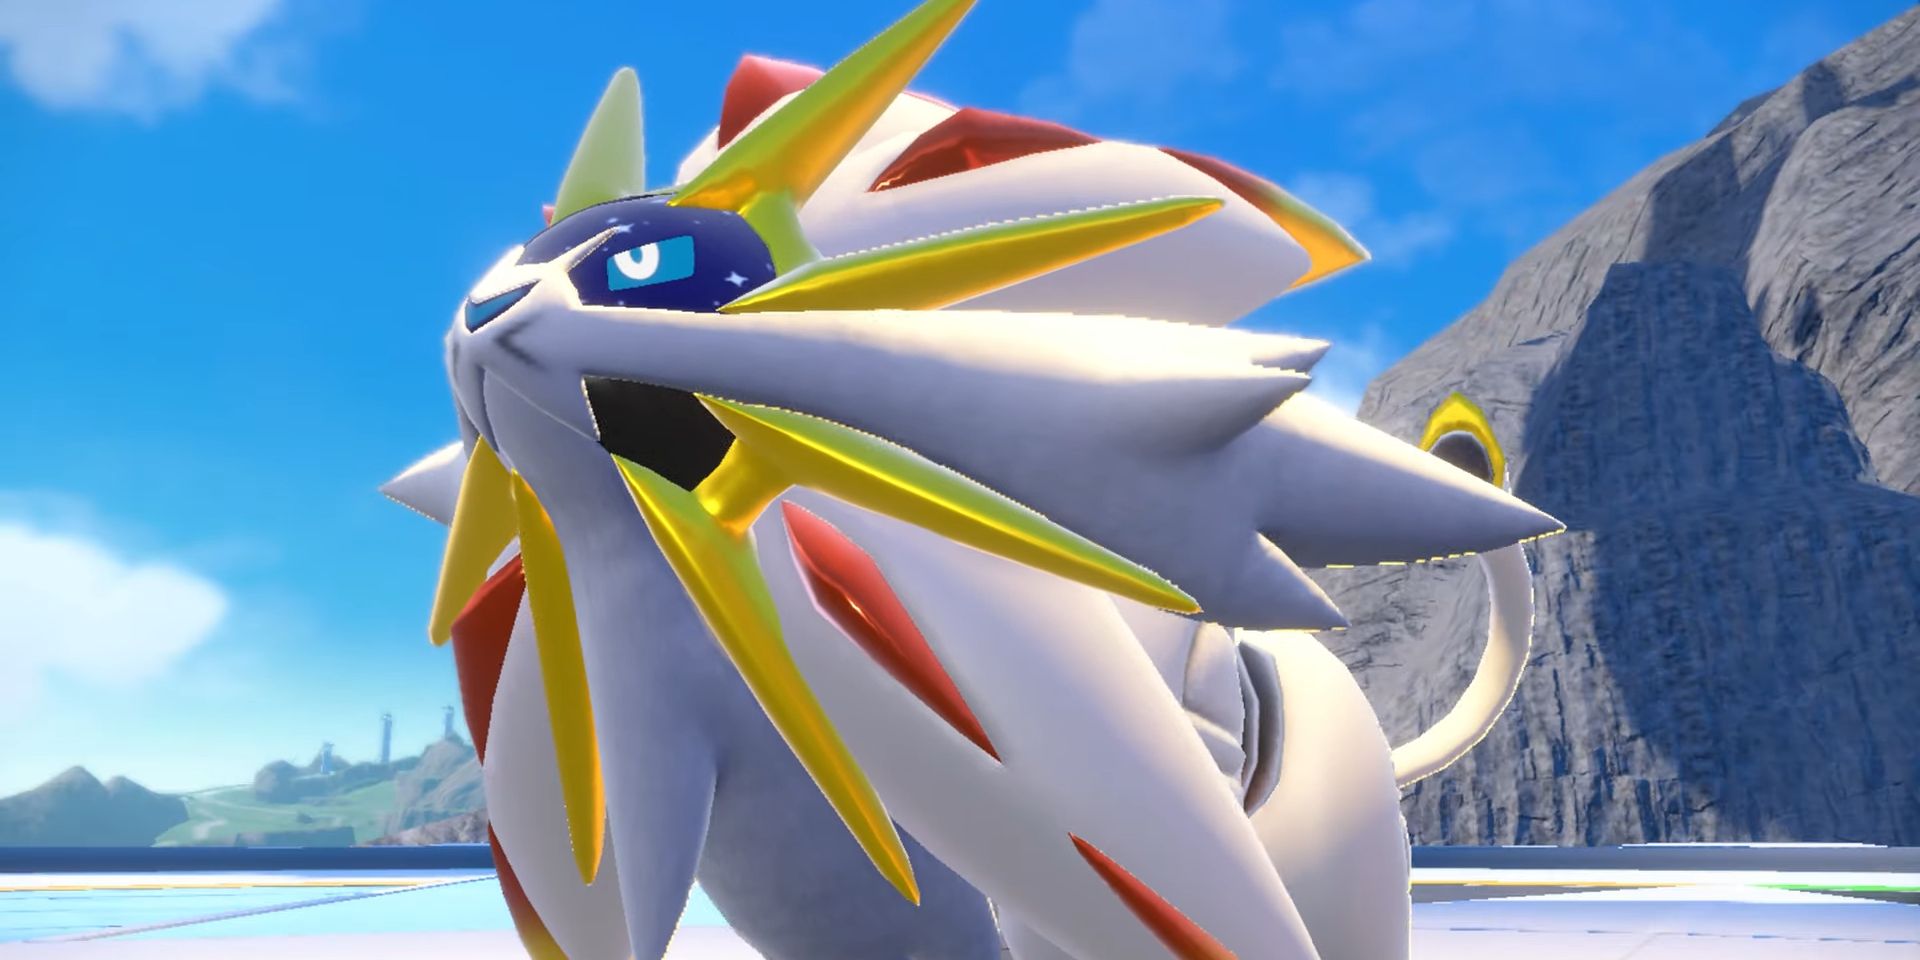 Solgaleo at the top of the Pokémon League in Scarlet and Violet.